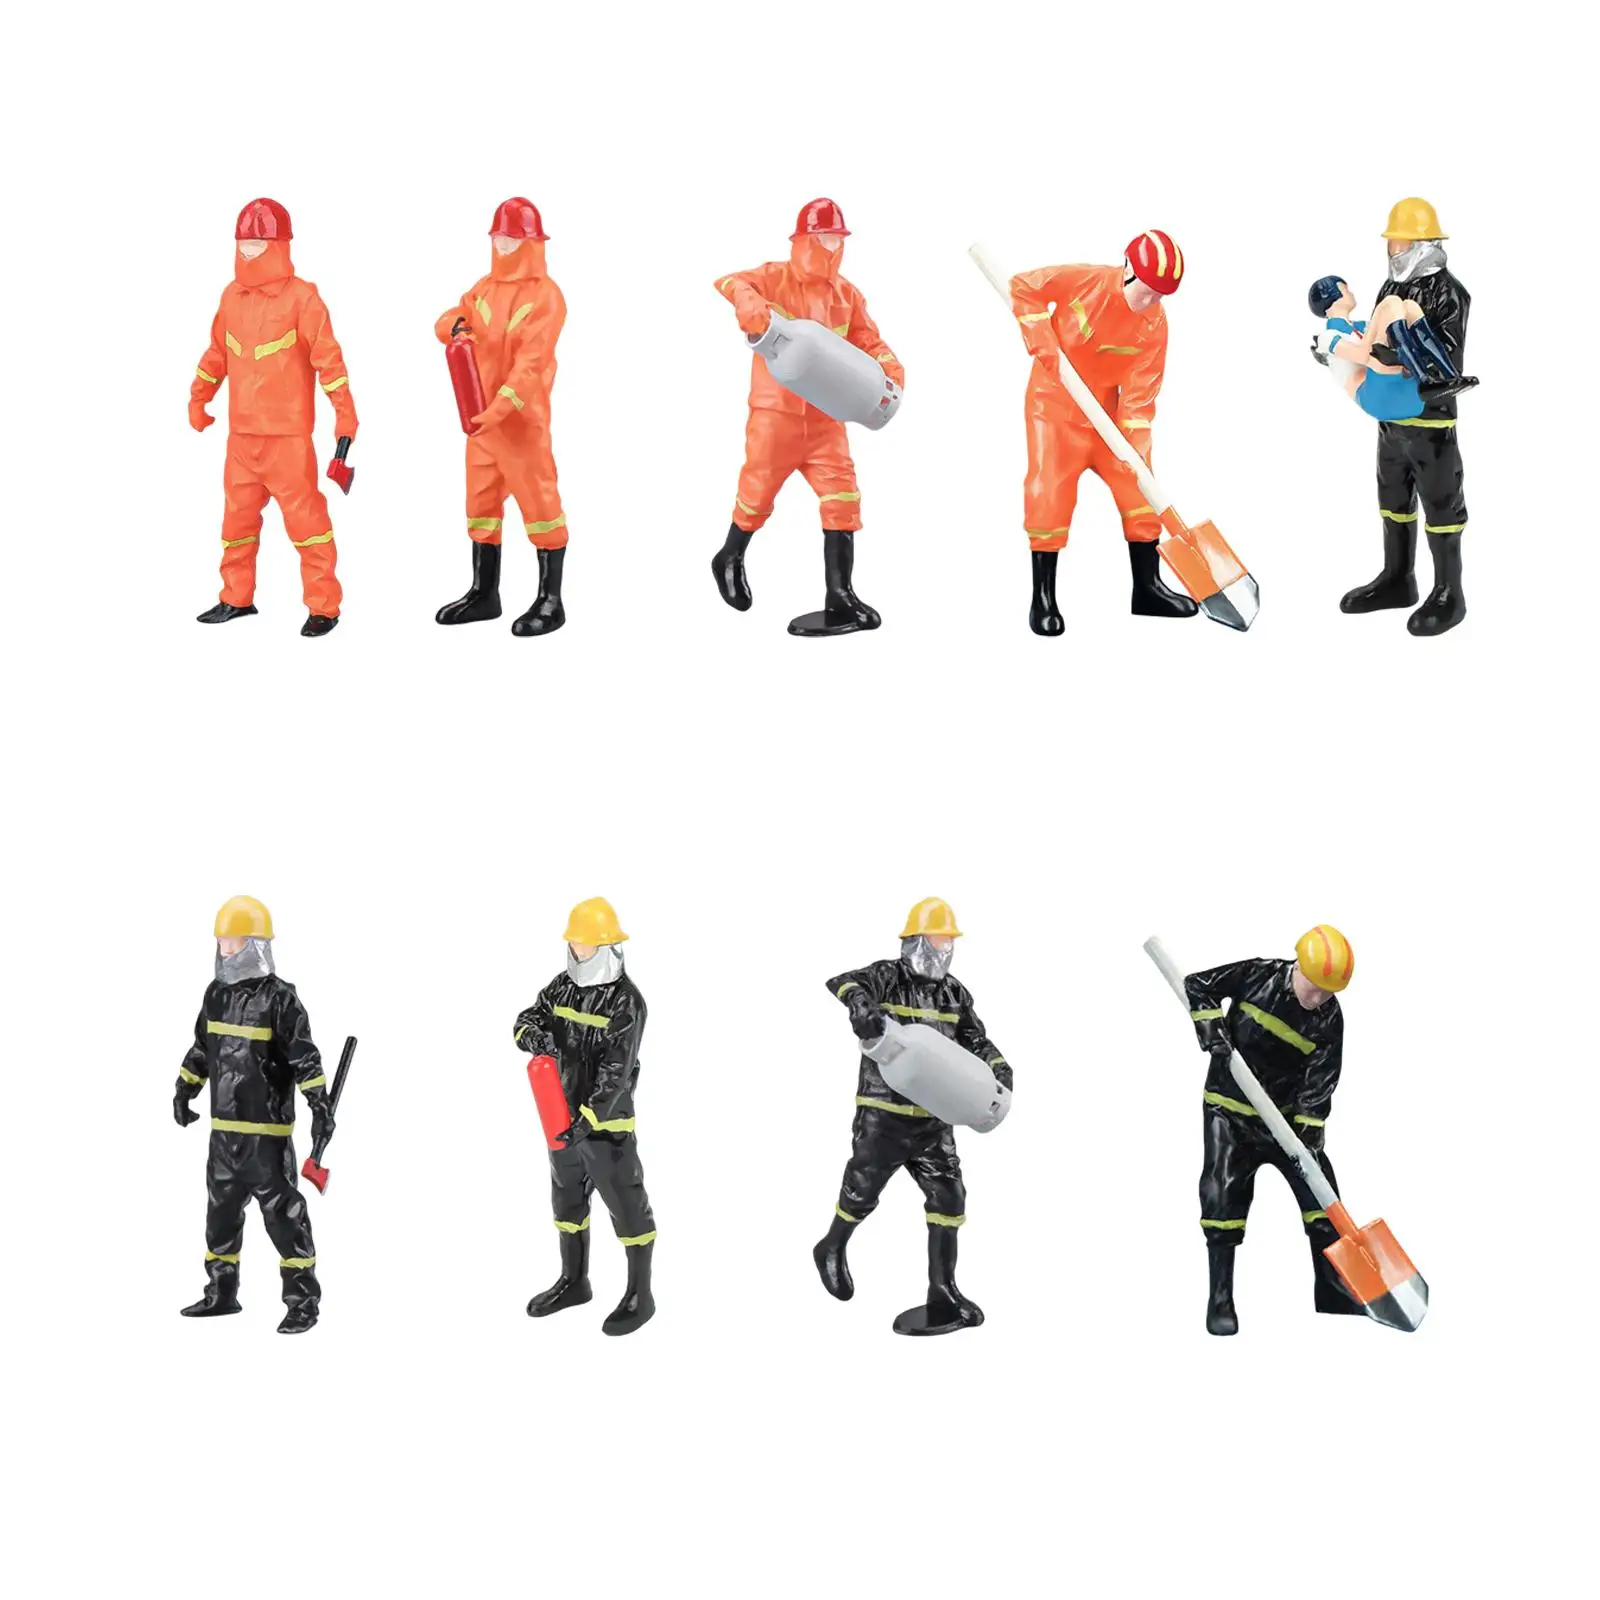 1/32 Models People Figures Firefighter Figures for Sand Table Diorama DIY Scene Layout